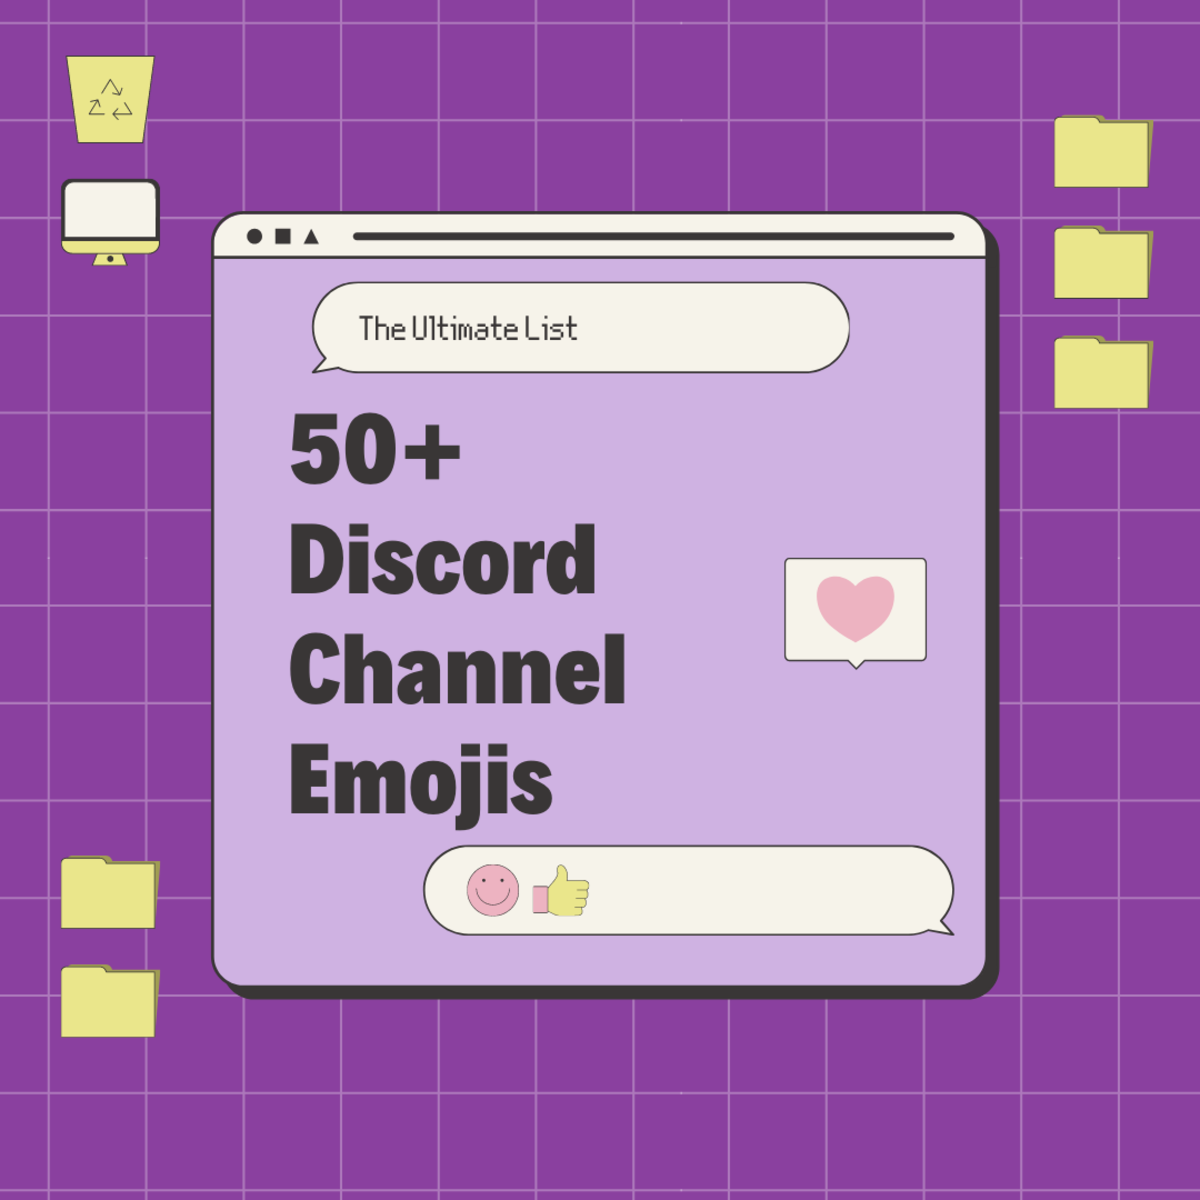 Discover 50+ Discord channel emoji in this in-depth guide!